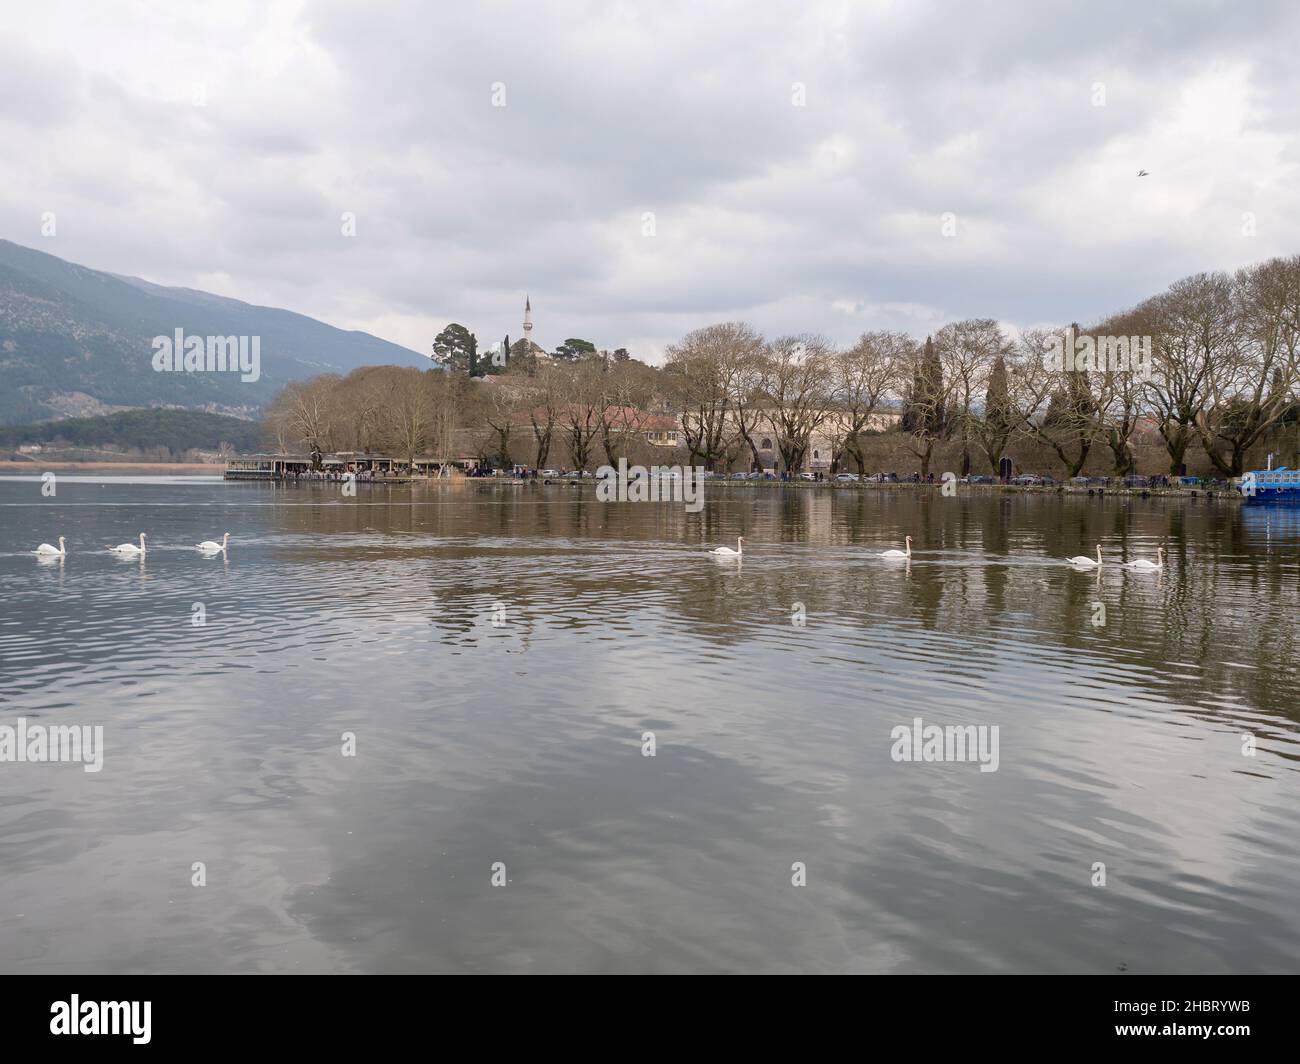 The lake of Ioannina city in Nothern Greece, in the afternoon with clouds Stock Photo